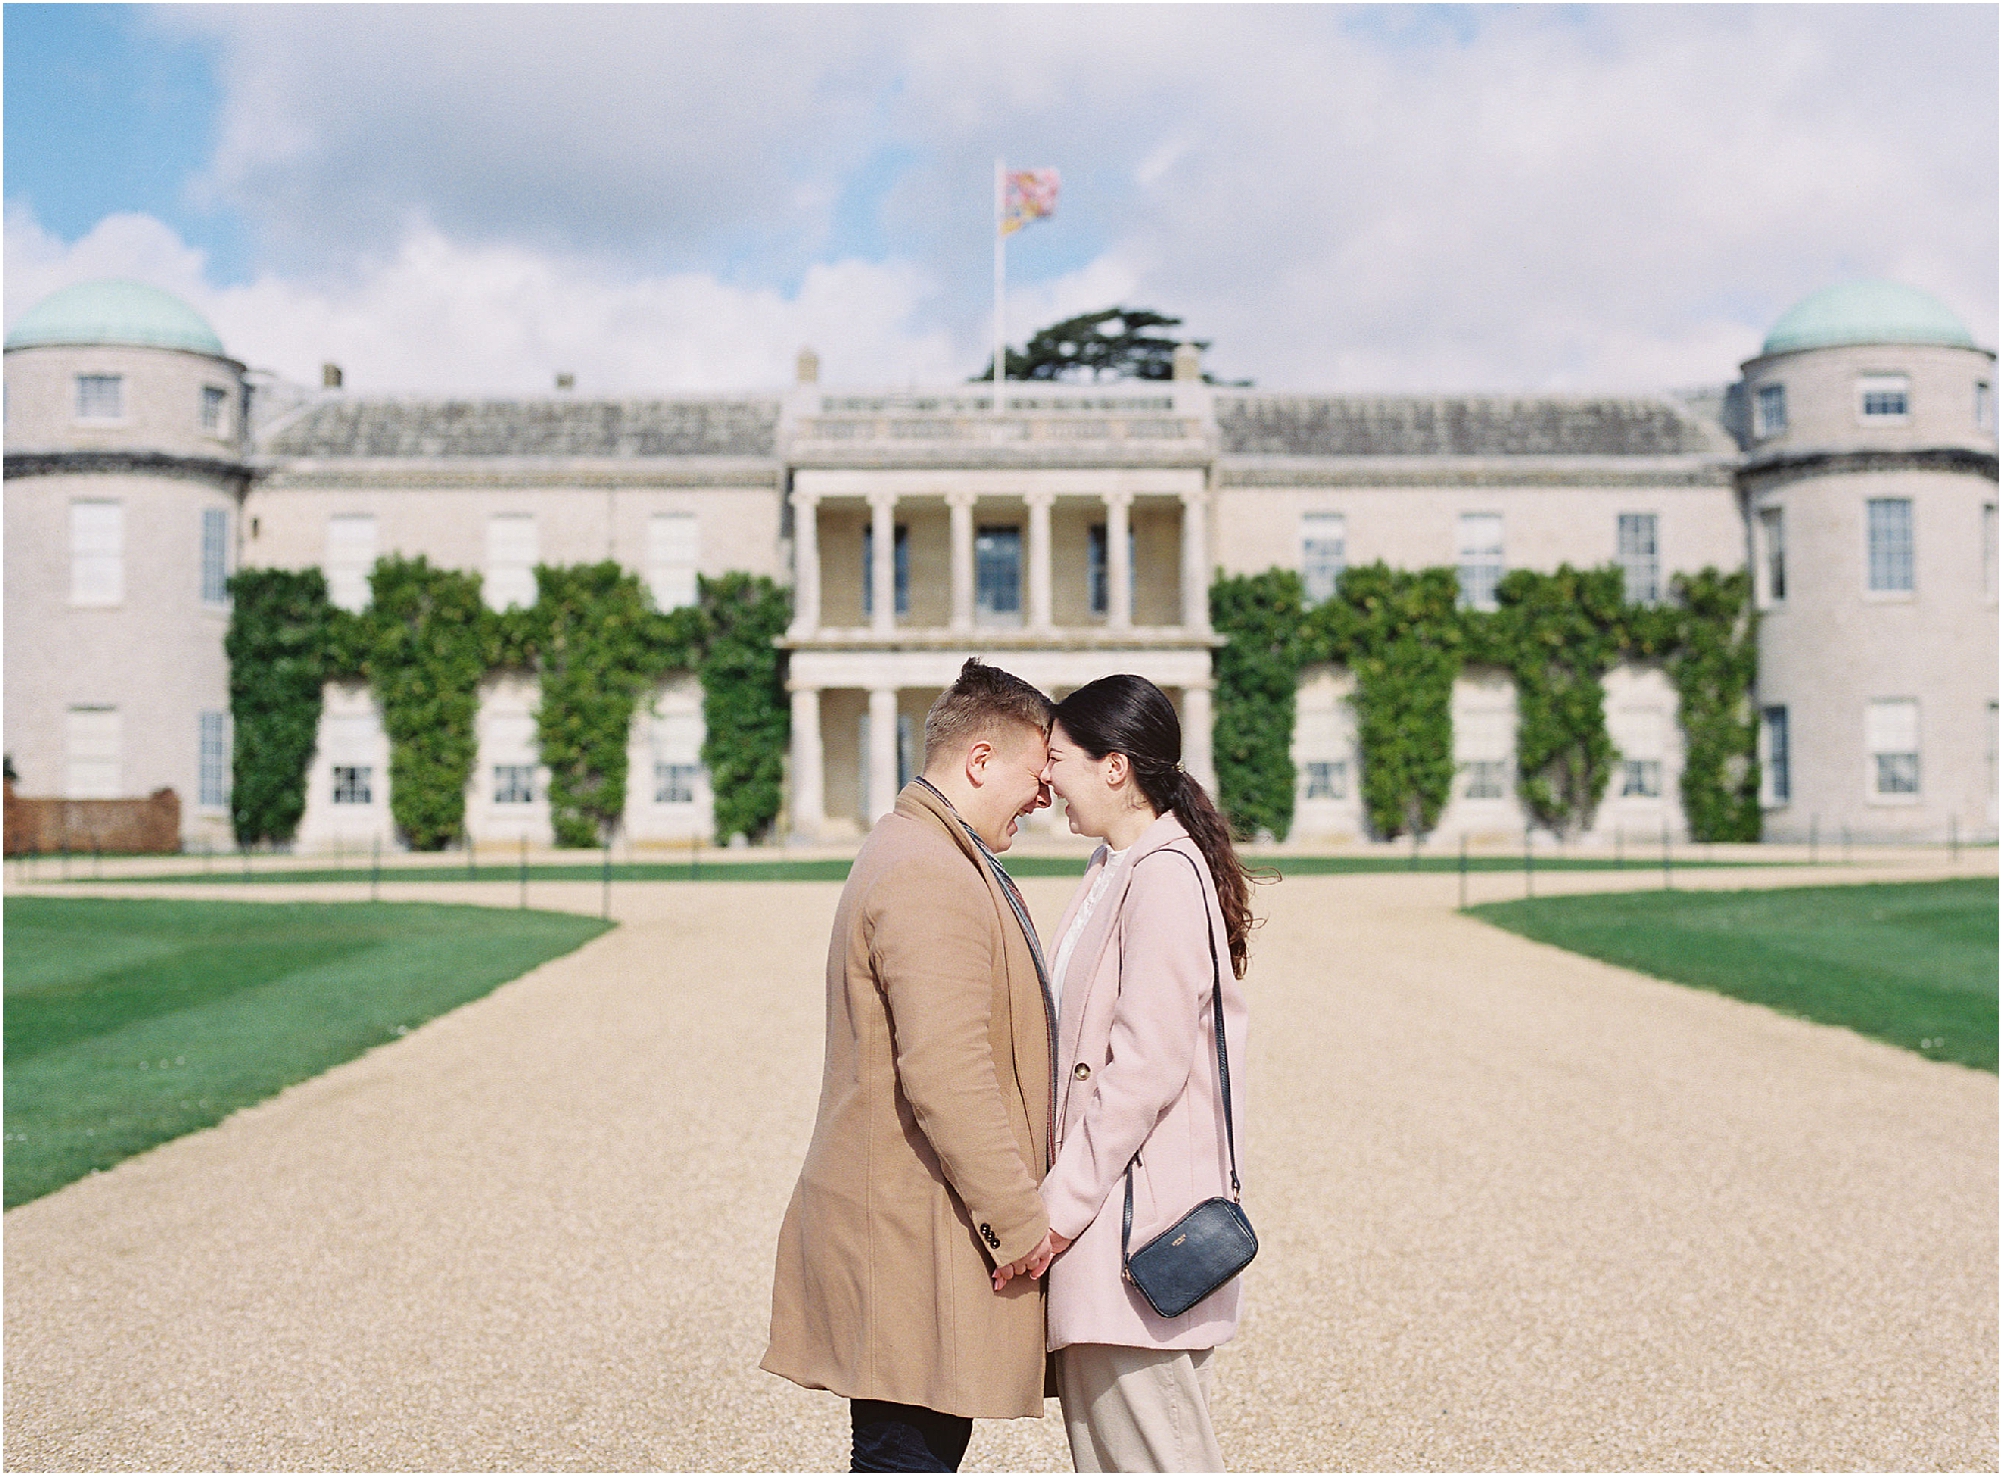 Couple laughing in front of Goodwood House Sussex on their engagement shoot